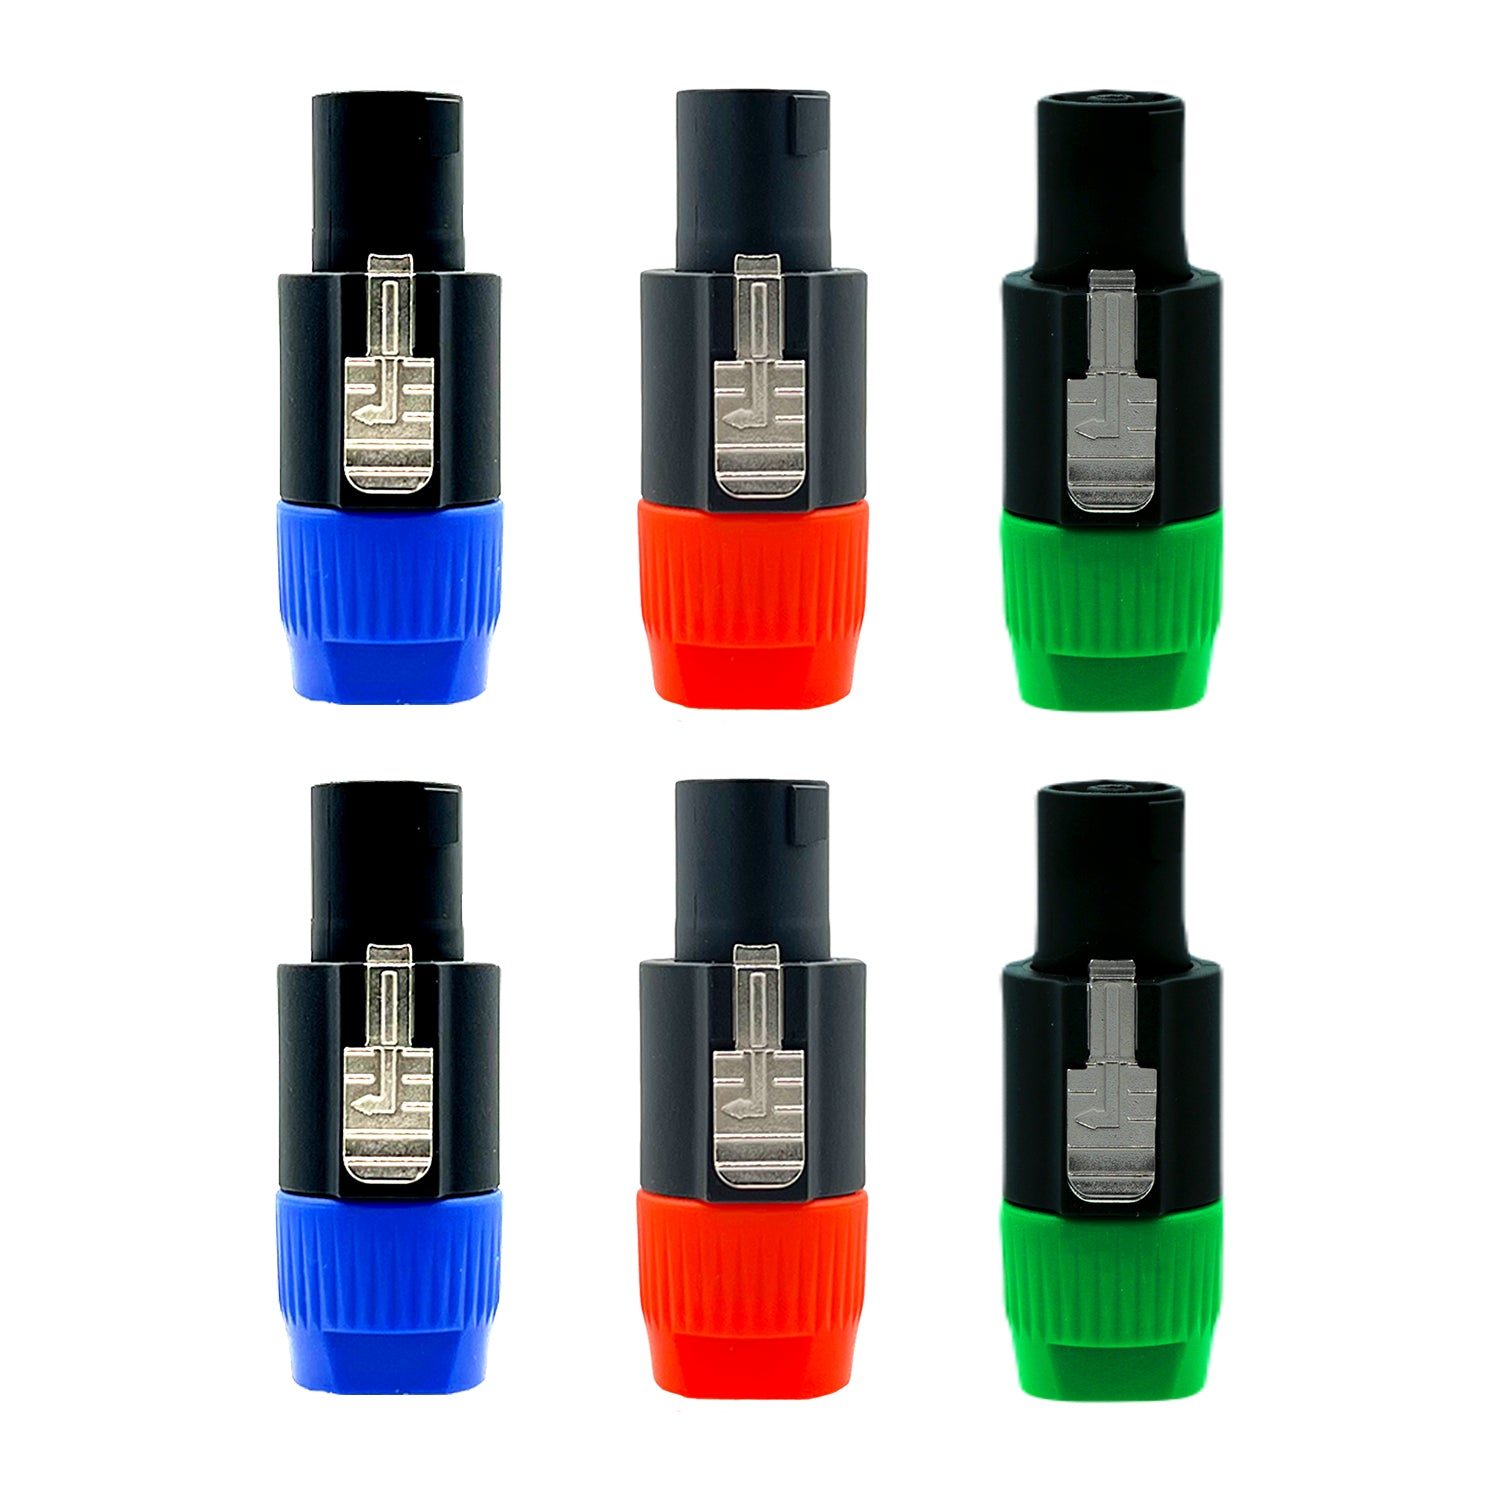 5 Core Speakon Adapter 6 Pack High Quality Audio Jack Male Audio Pin Speaker Adapter Connector